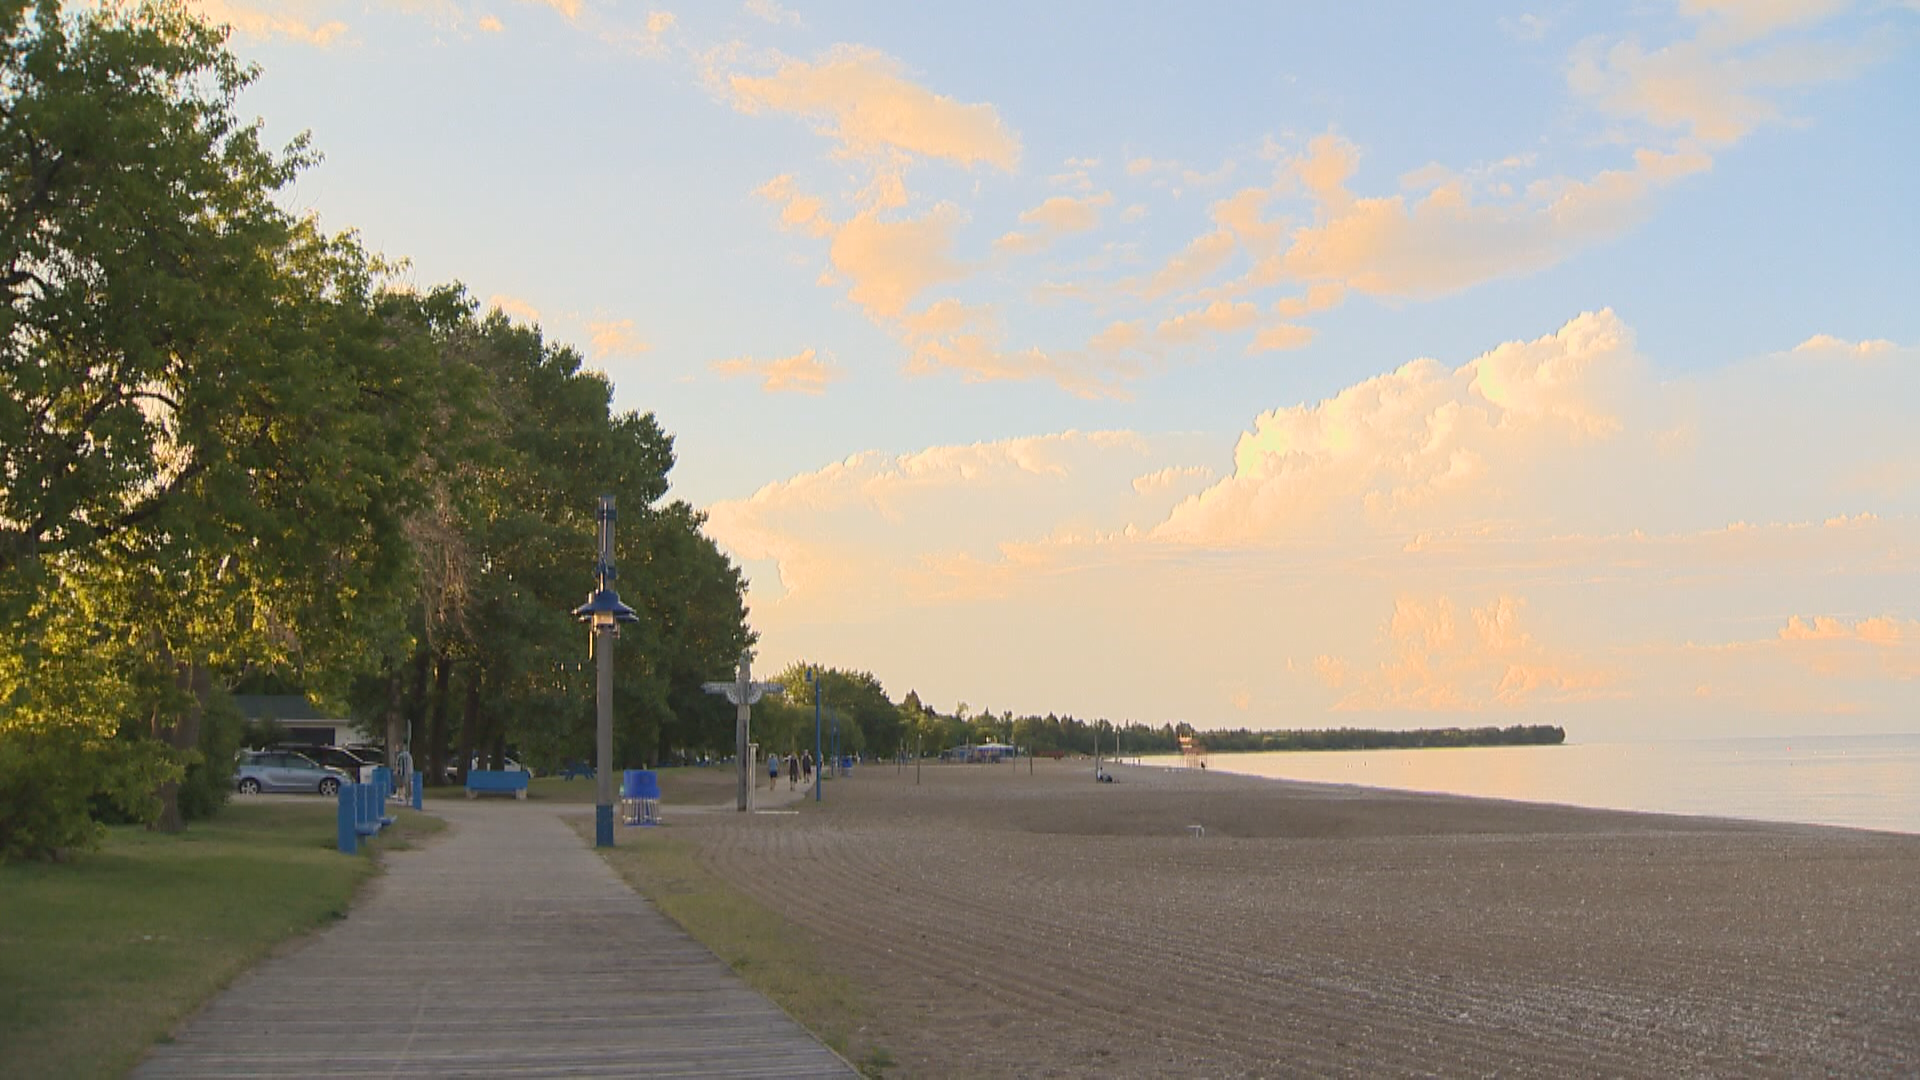 Manitoba shores up summer safety with beach officer program